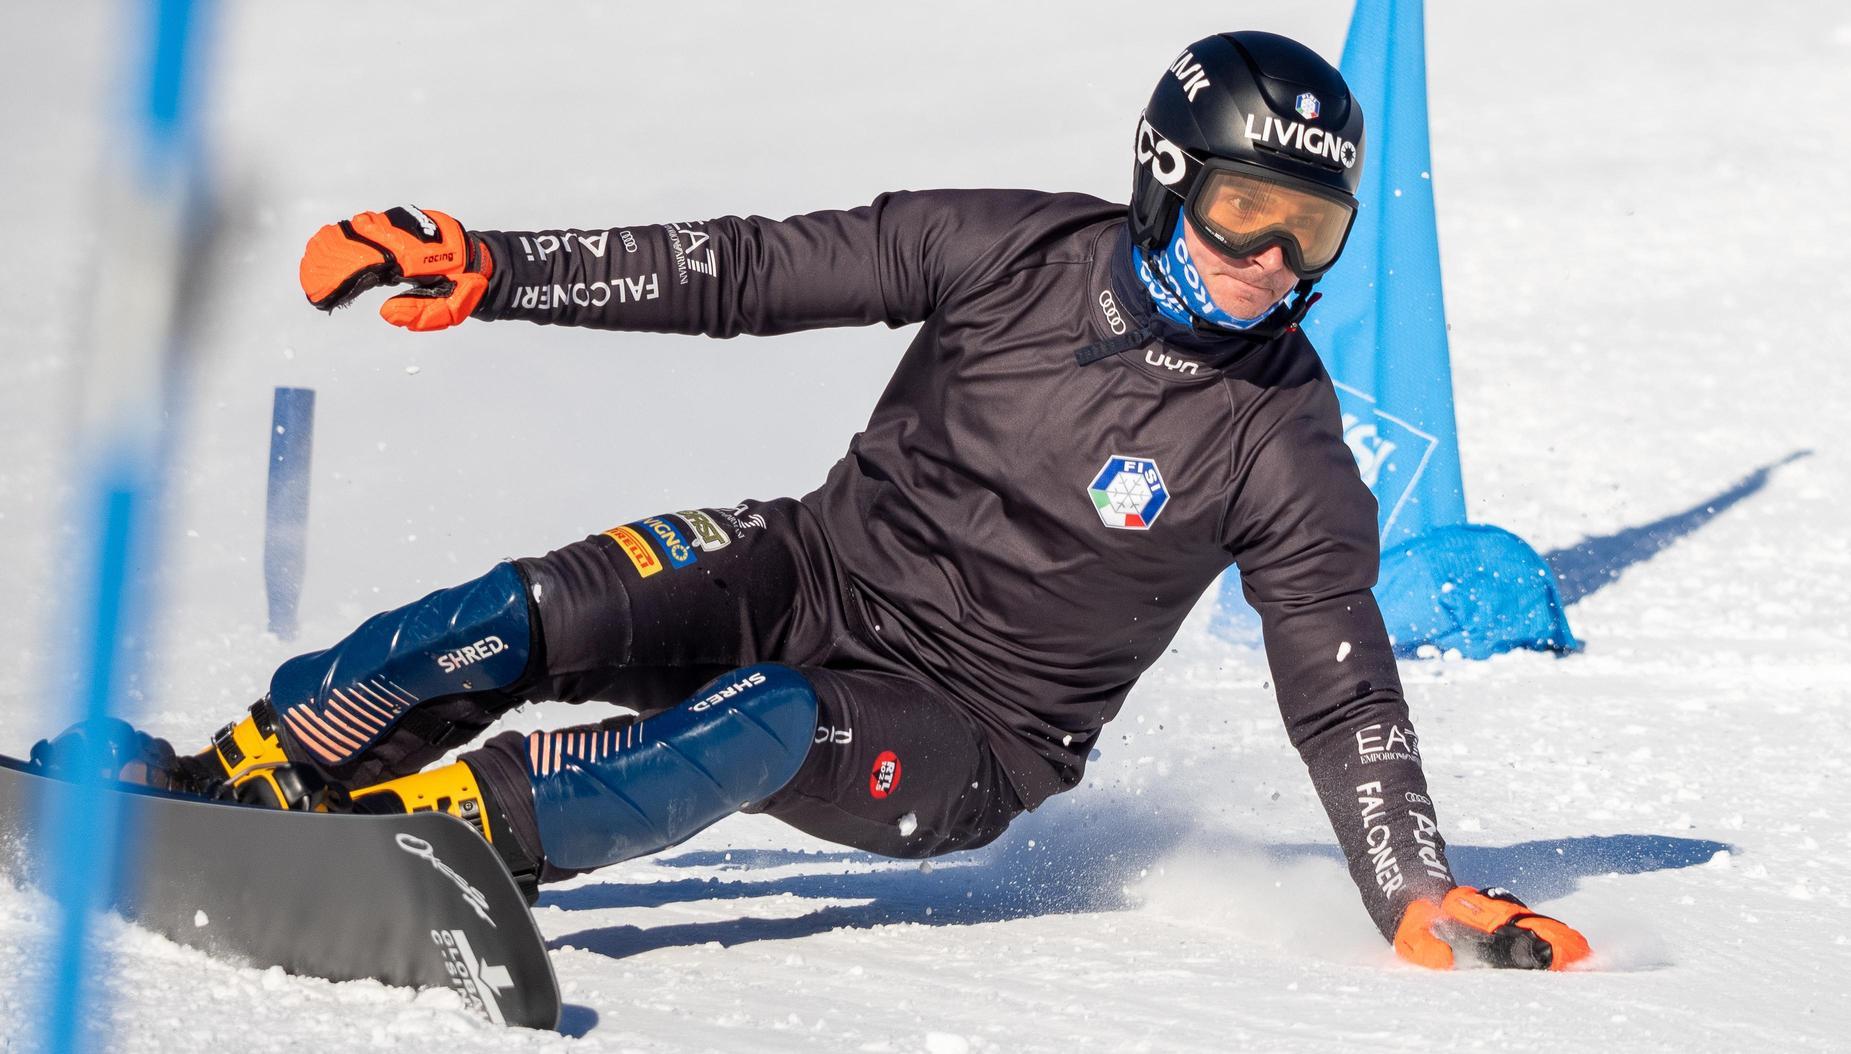 “The Games in my Livigno, the best”